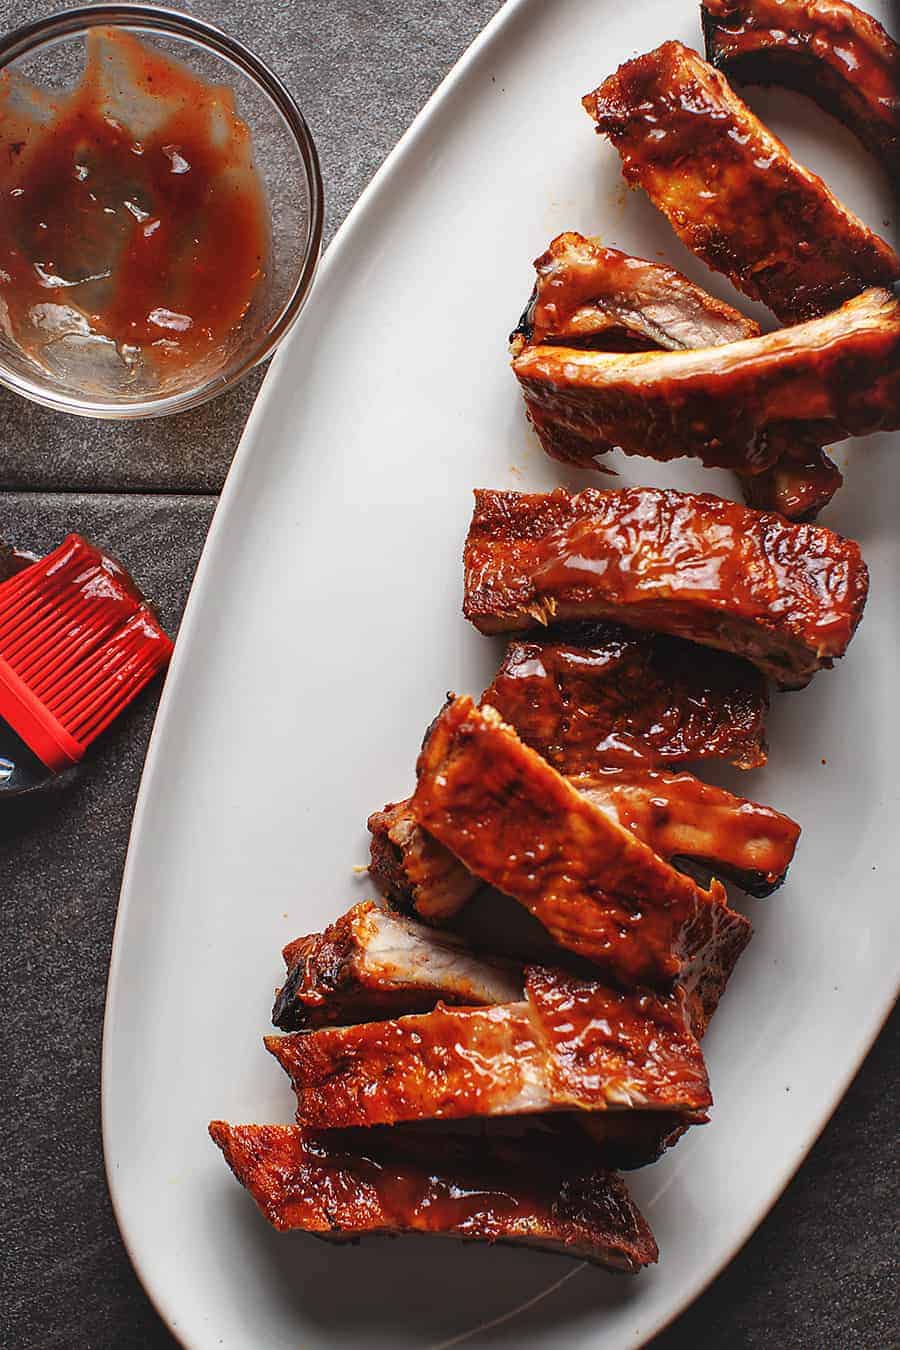 Easy Oven Baked Ribs Low Carb With Jennifer,How Long Are Car Seats Good For From Manufacture Date